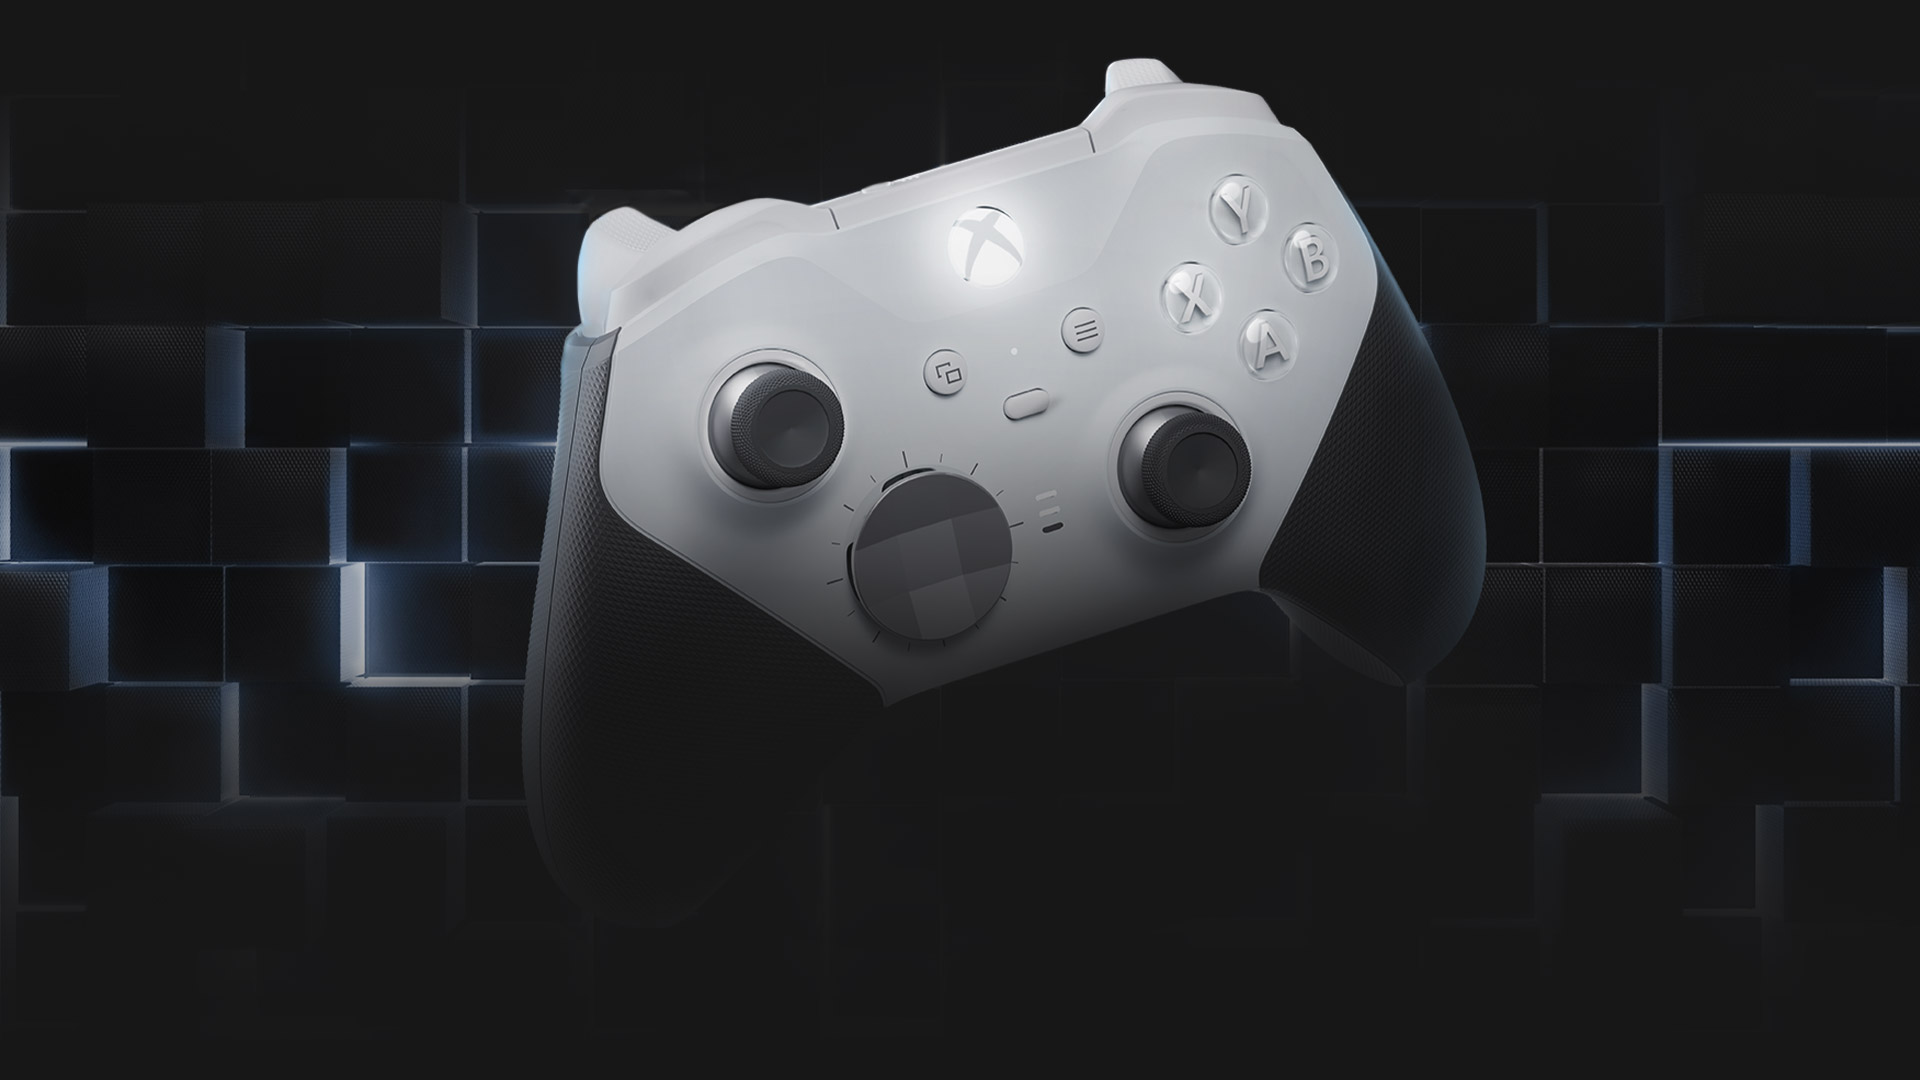 Xbox Elite Wireless Controller Series 2 – Core controller in front of a cubed background.